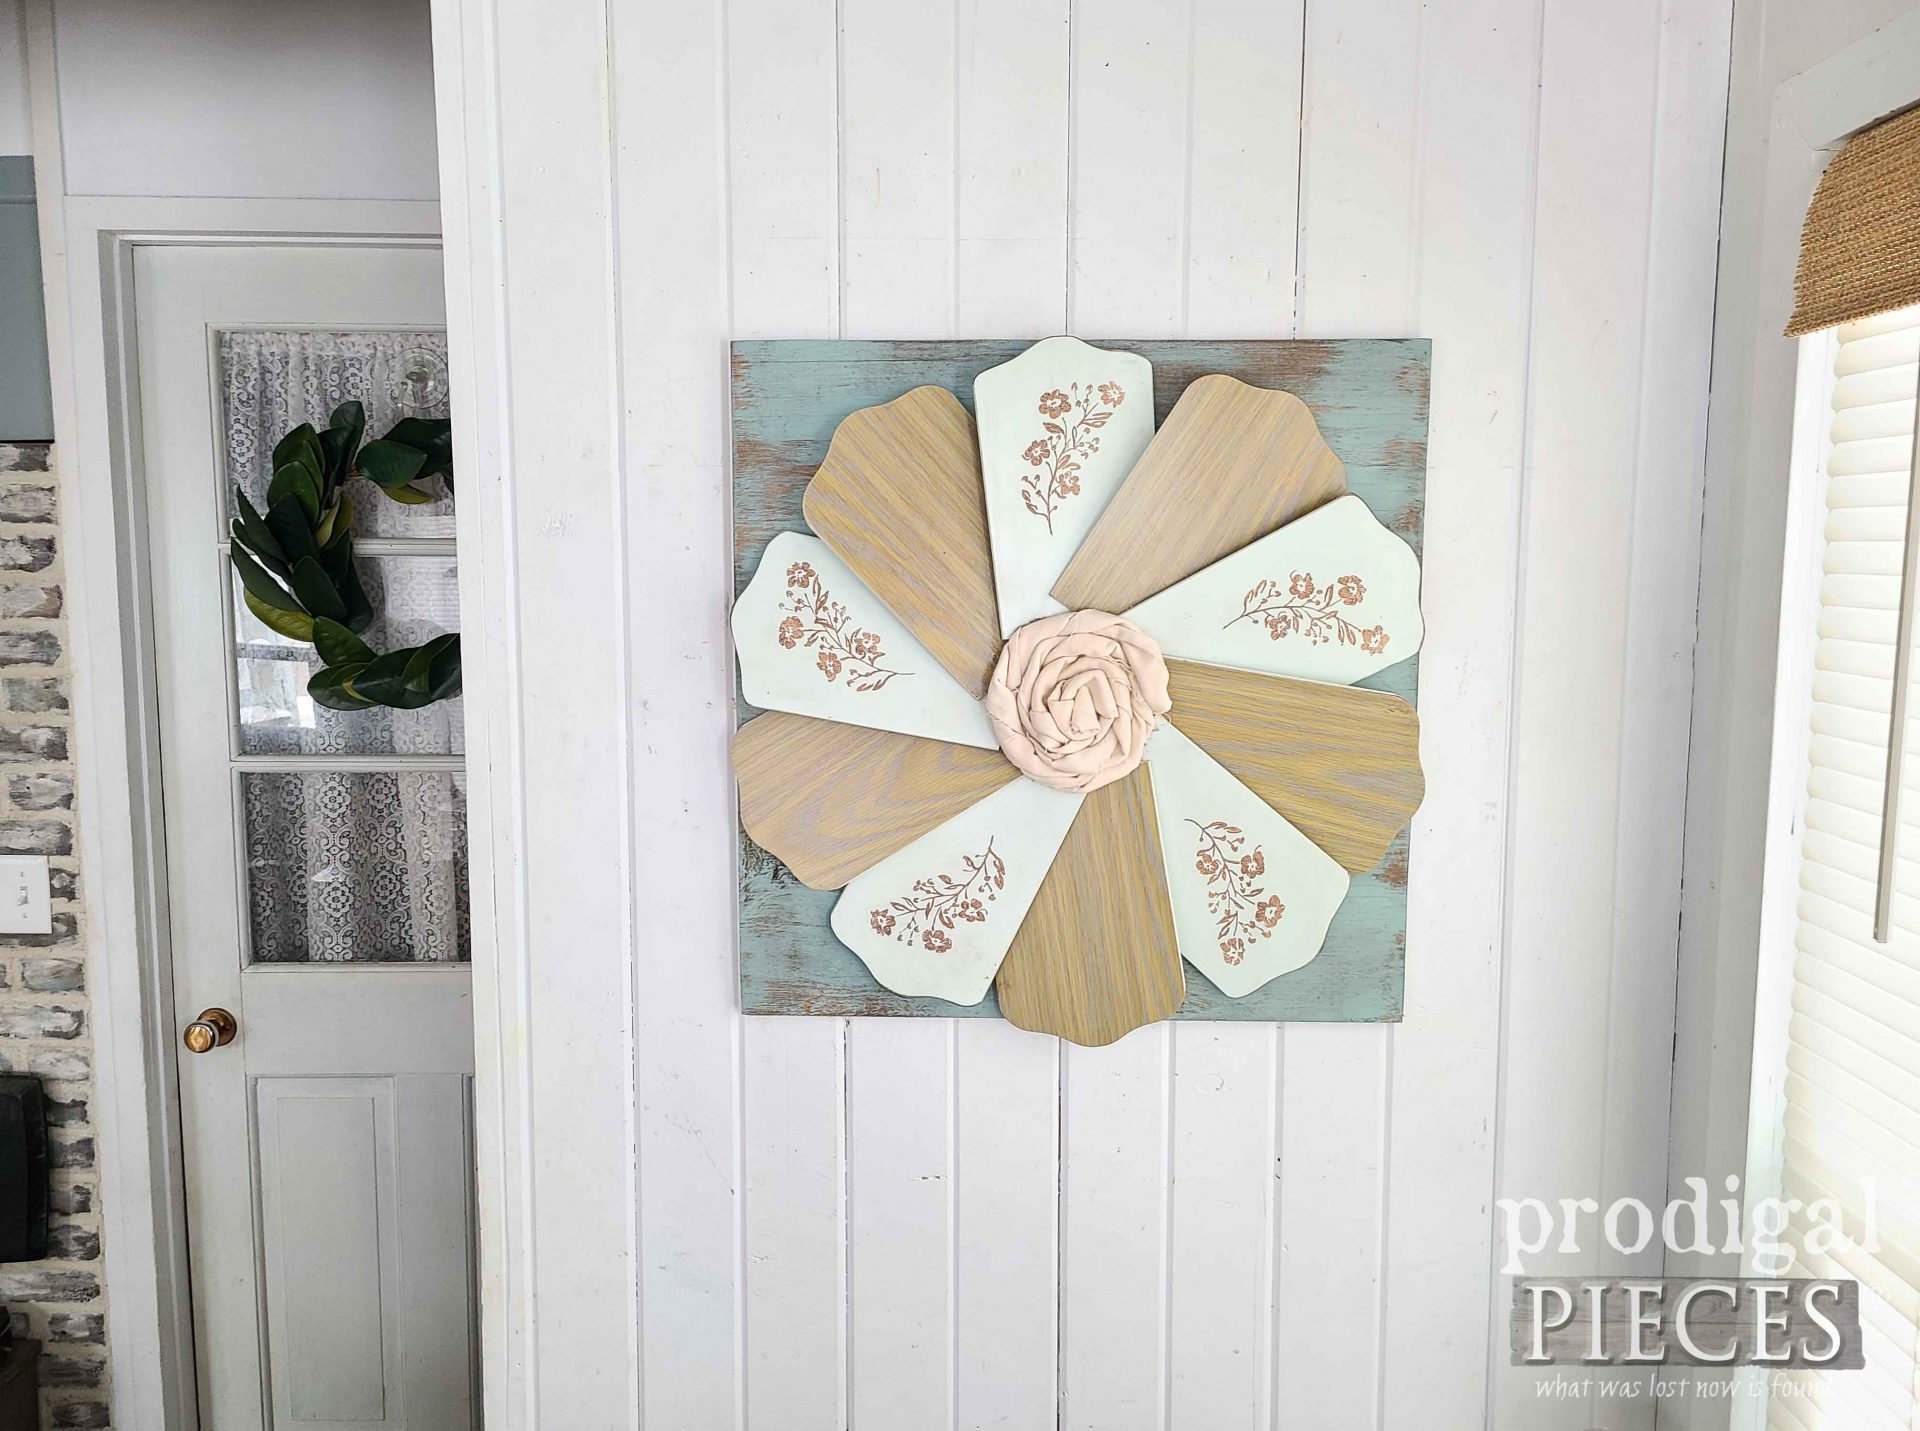 Engraved Ceiling Fan Blade Wall Art by Larissa of Prodigal Pieces | prodigalpieces.com #prodigalpieces #art #diy